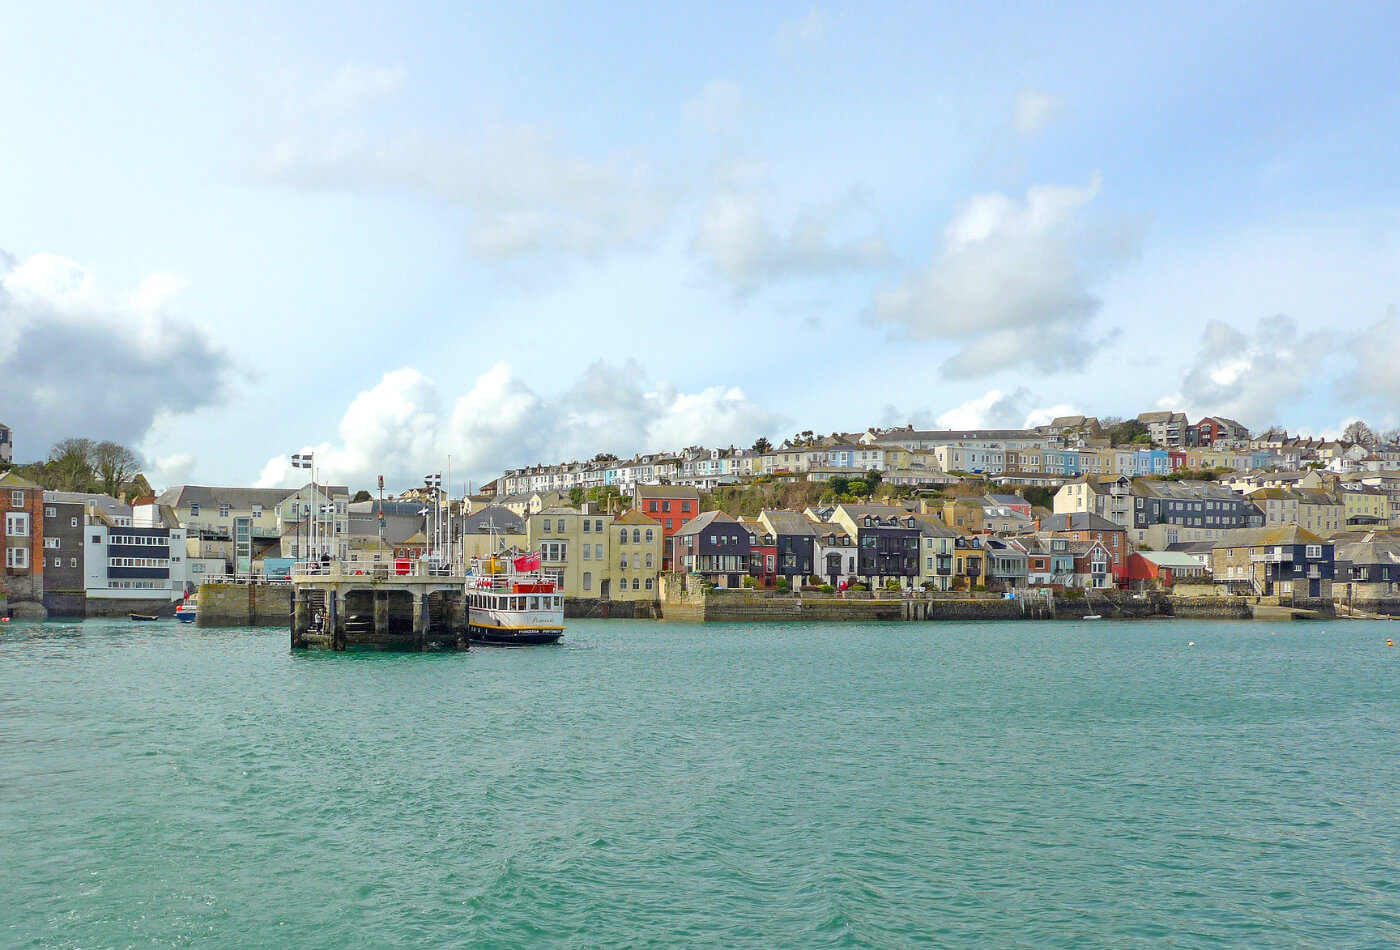 View from the water of the town of Falmouth in Cornwall.